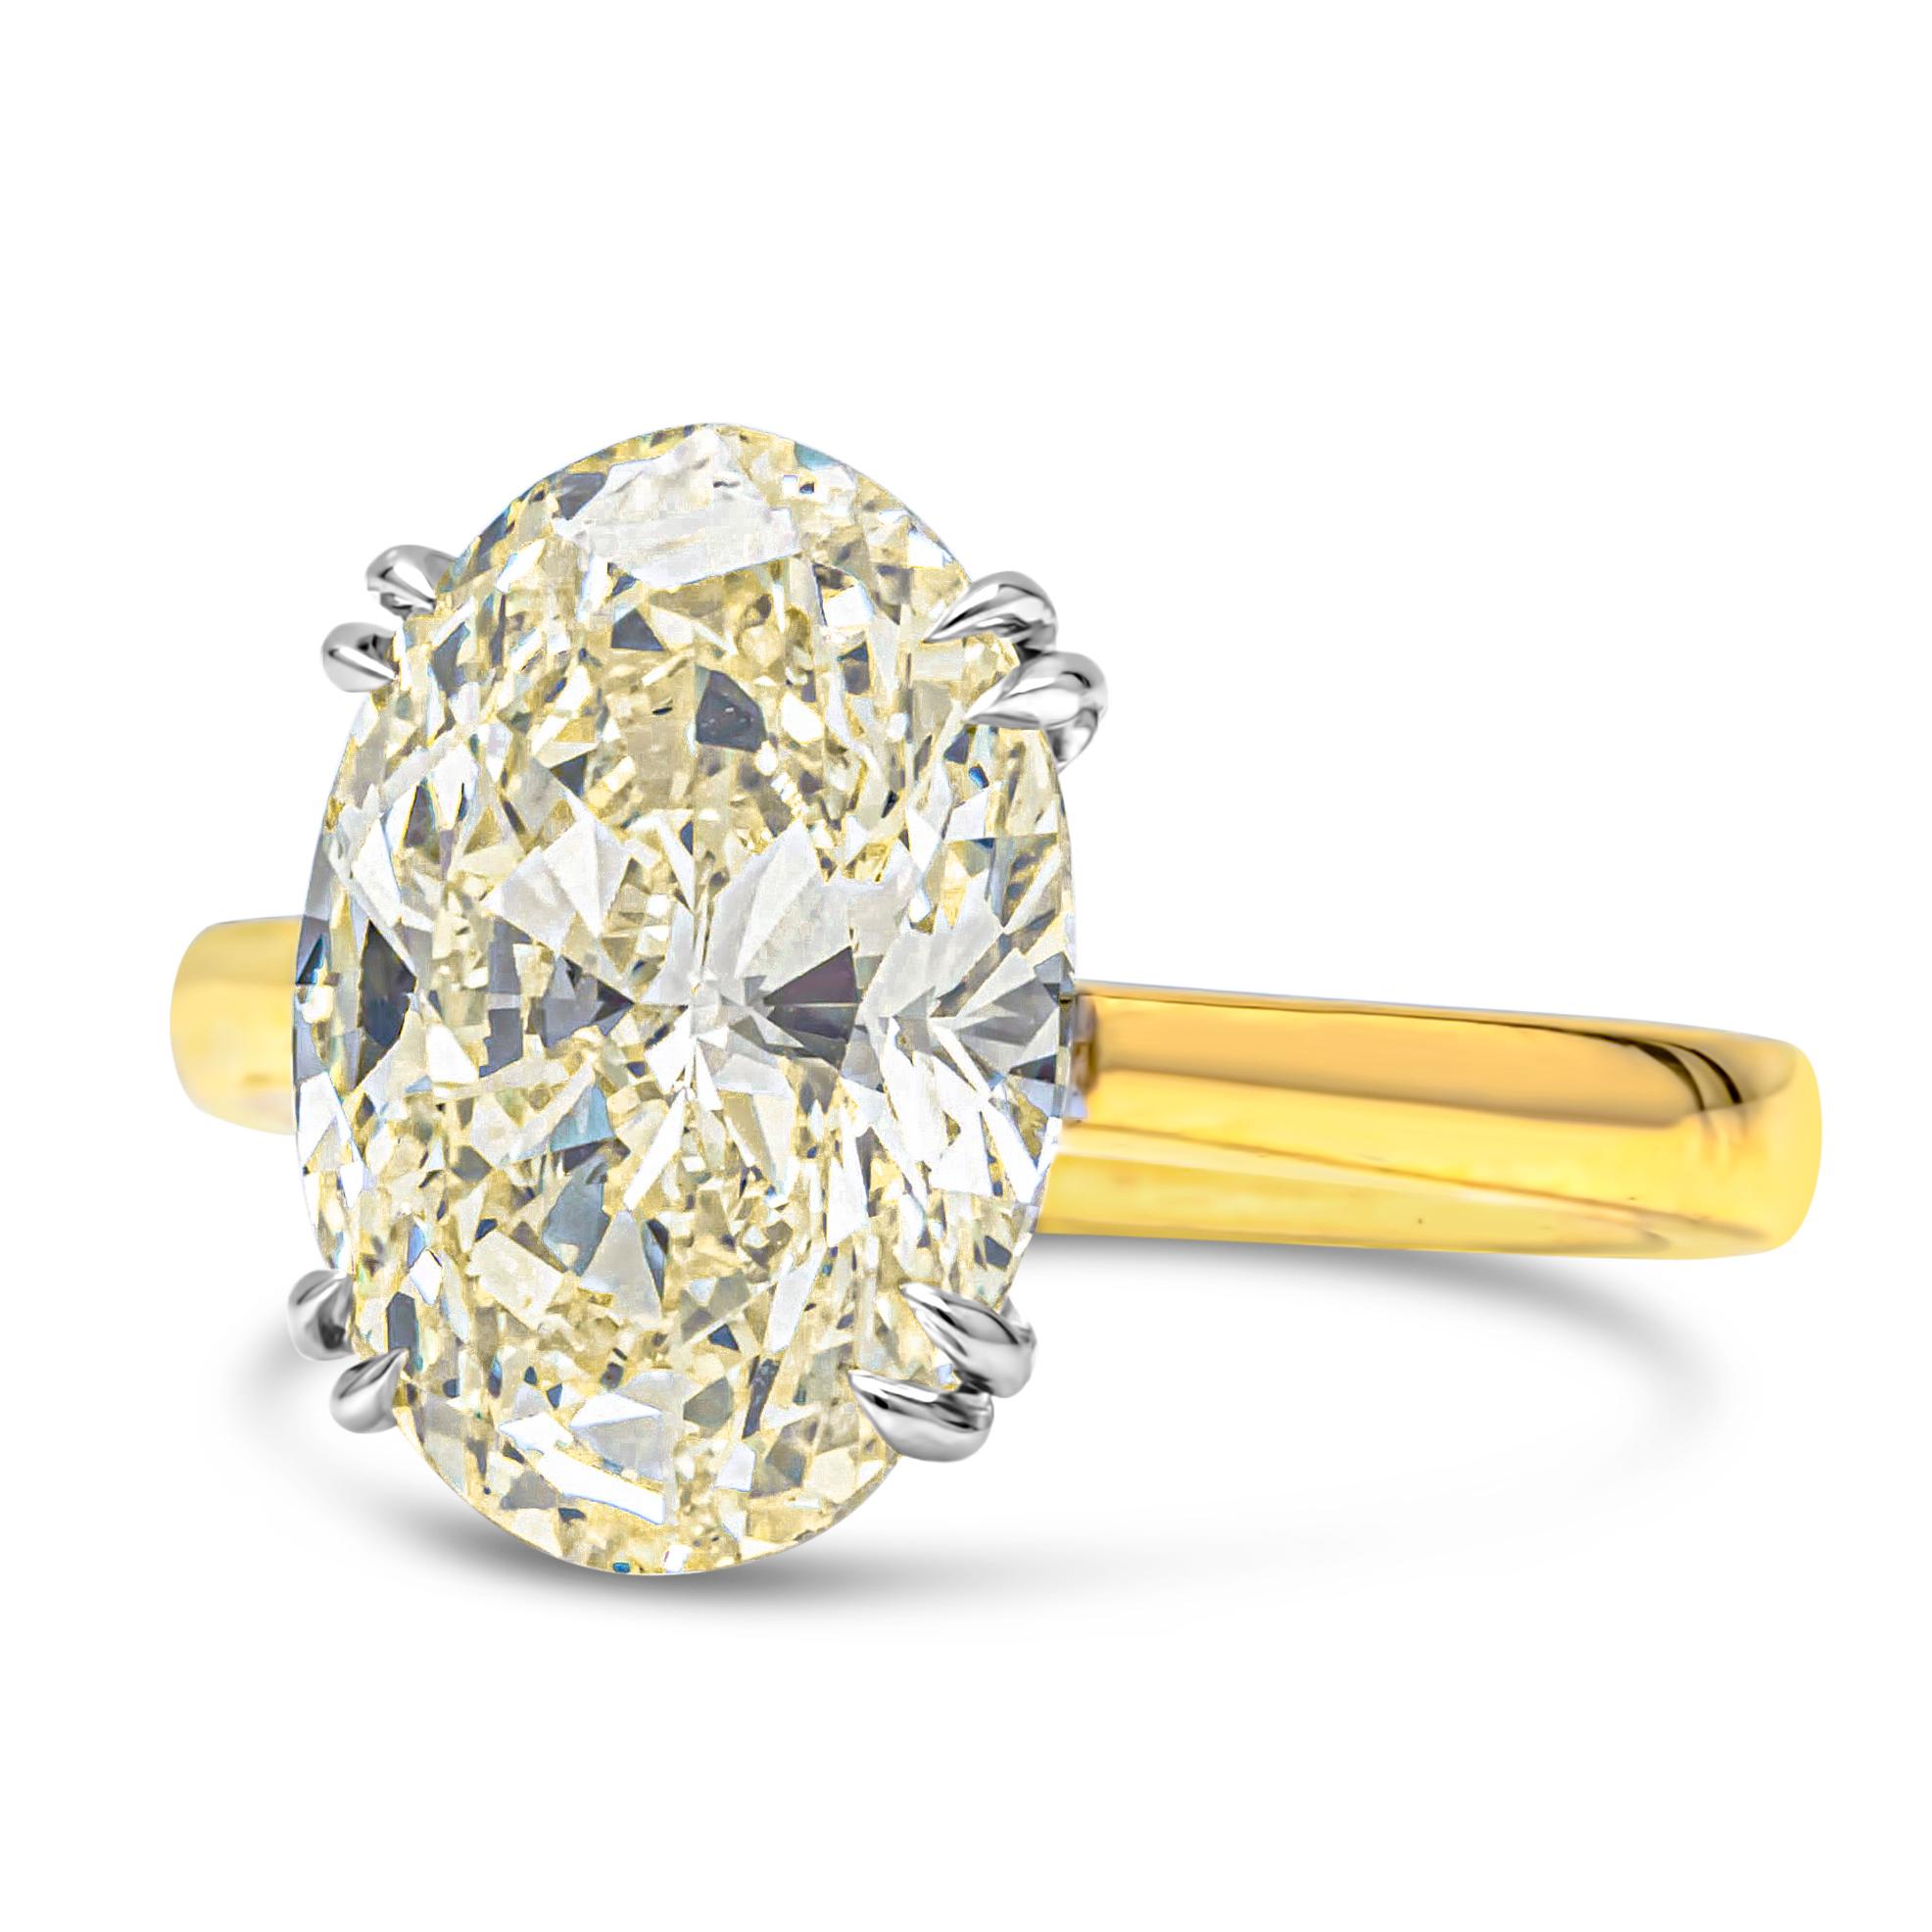 This beautiful high end jewelry solitaire engagement ring showcasing a GIA Certified 5.47 carats oval cut diamond, M Color and VVS2 in Clarity. Set in a double claw prongs setting in platinum and perfectly made in 18K Yellow Gold band. 